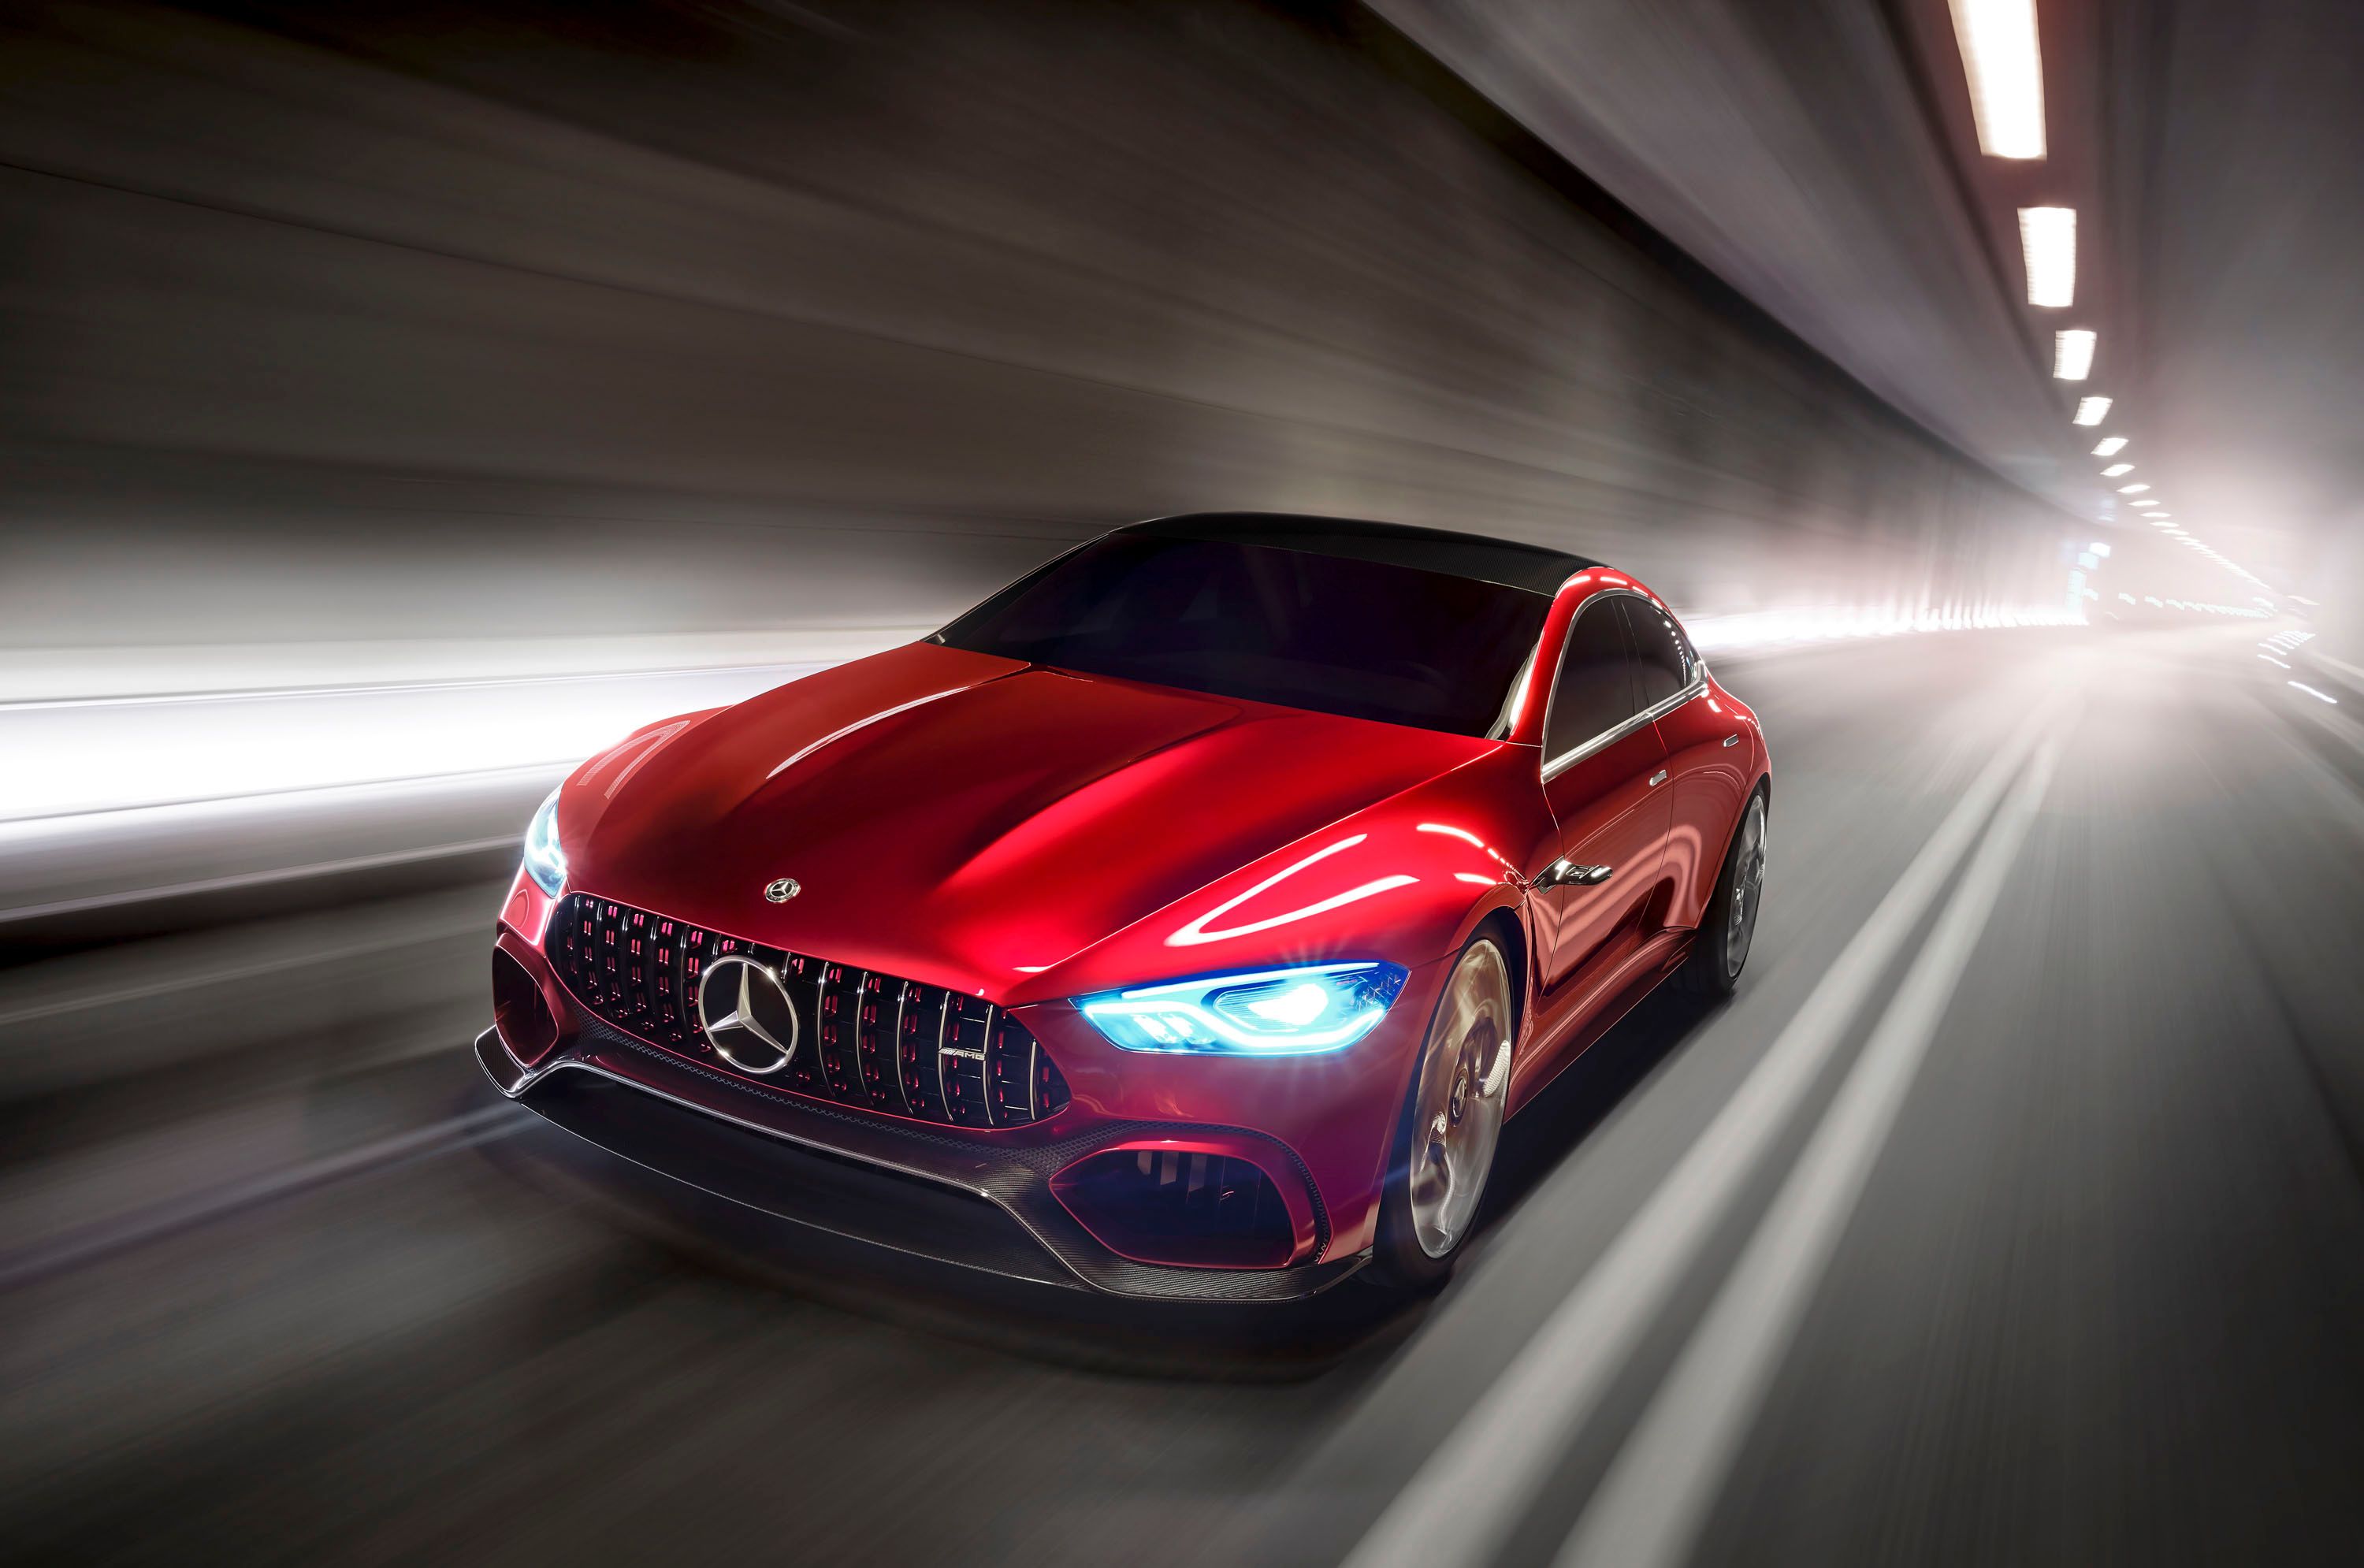 AMG is Making a Huge Push Toward Electrification, And You Need to Know What to Expect